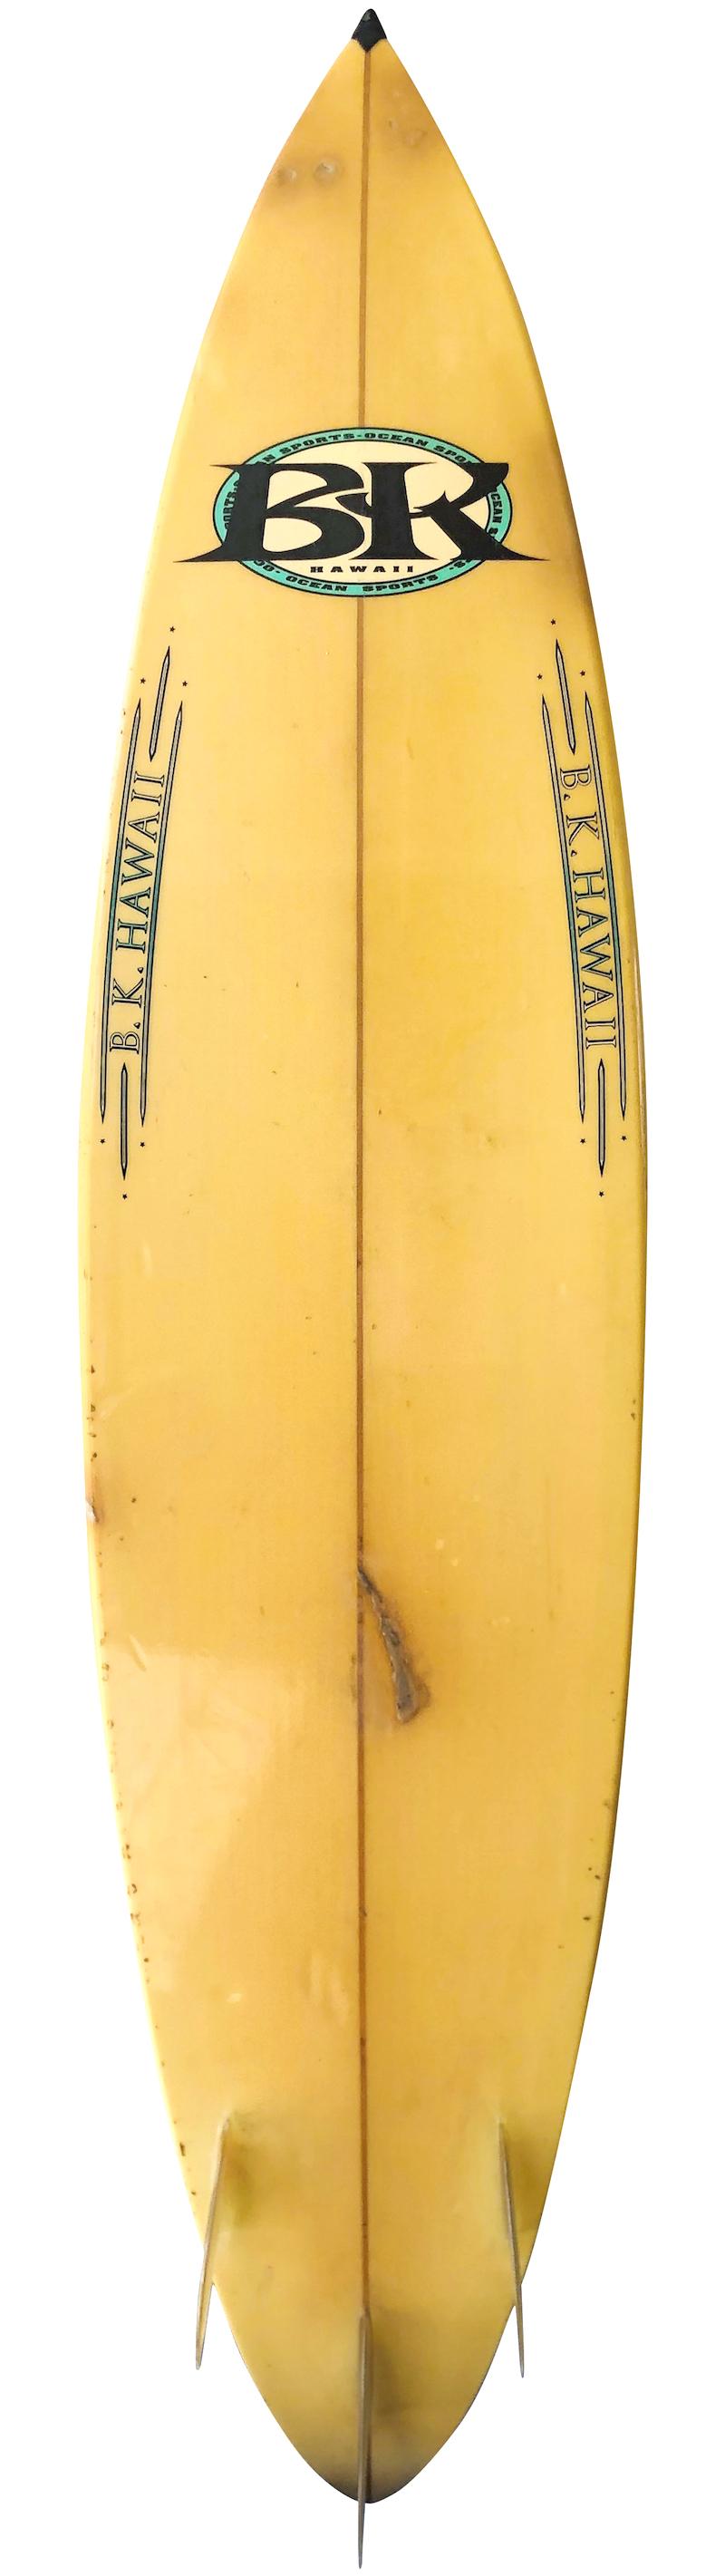 Early 1990s BK Hawaii thruster (tri-fin) surfboard shaped by Barry Kanaiaupuni. Features a rounded pintail design with glassed on fins. This vintage surfboard remains in all original condition.

Barry Kanaiaupuni is best known for his dominance at